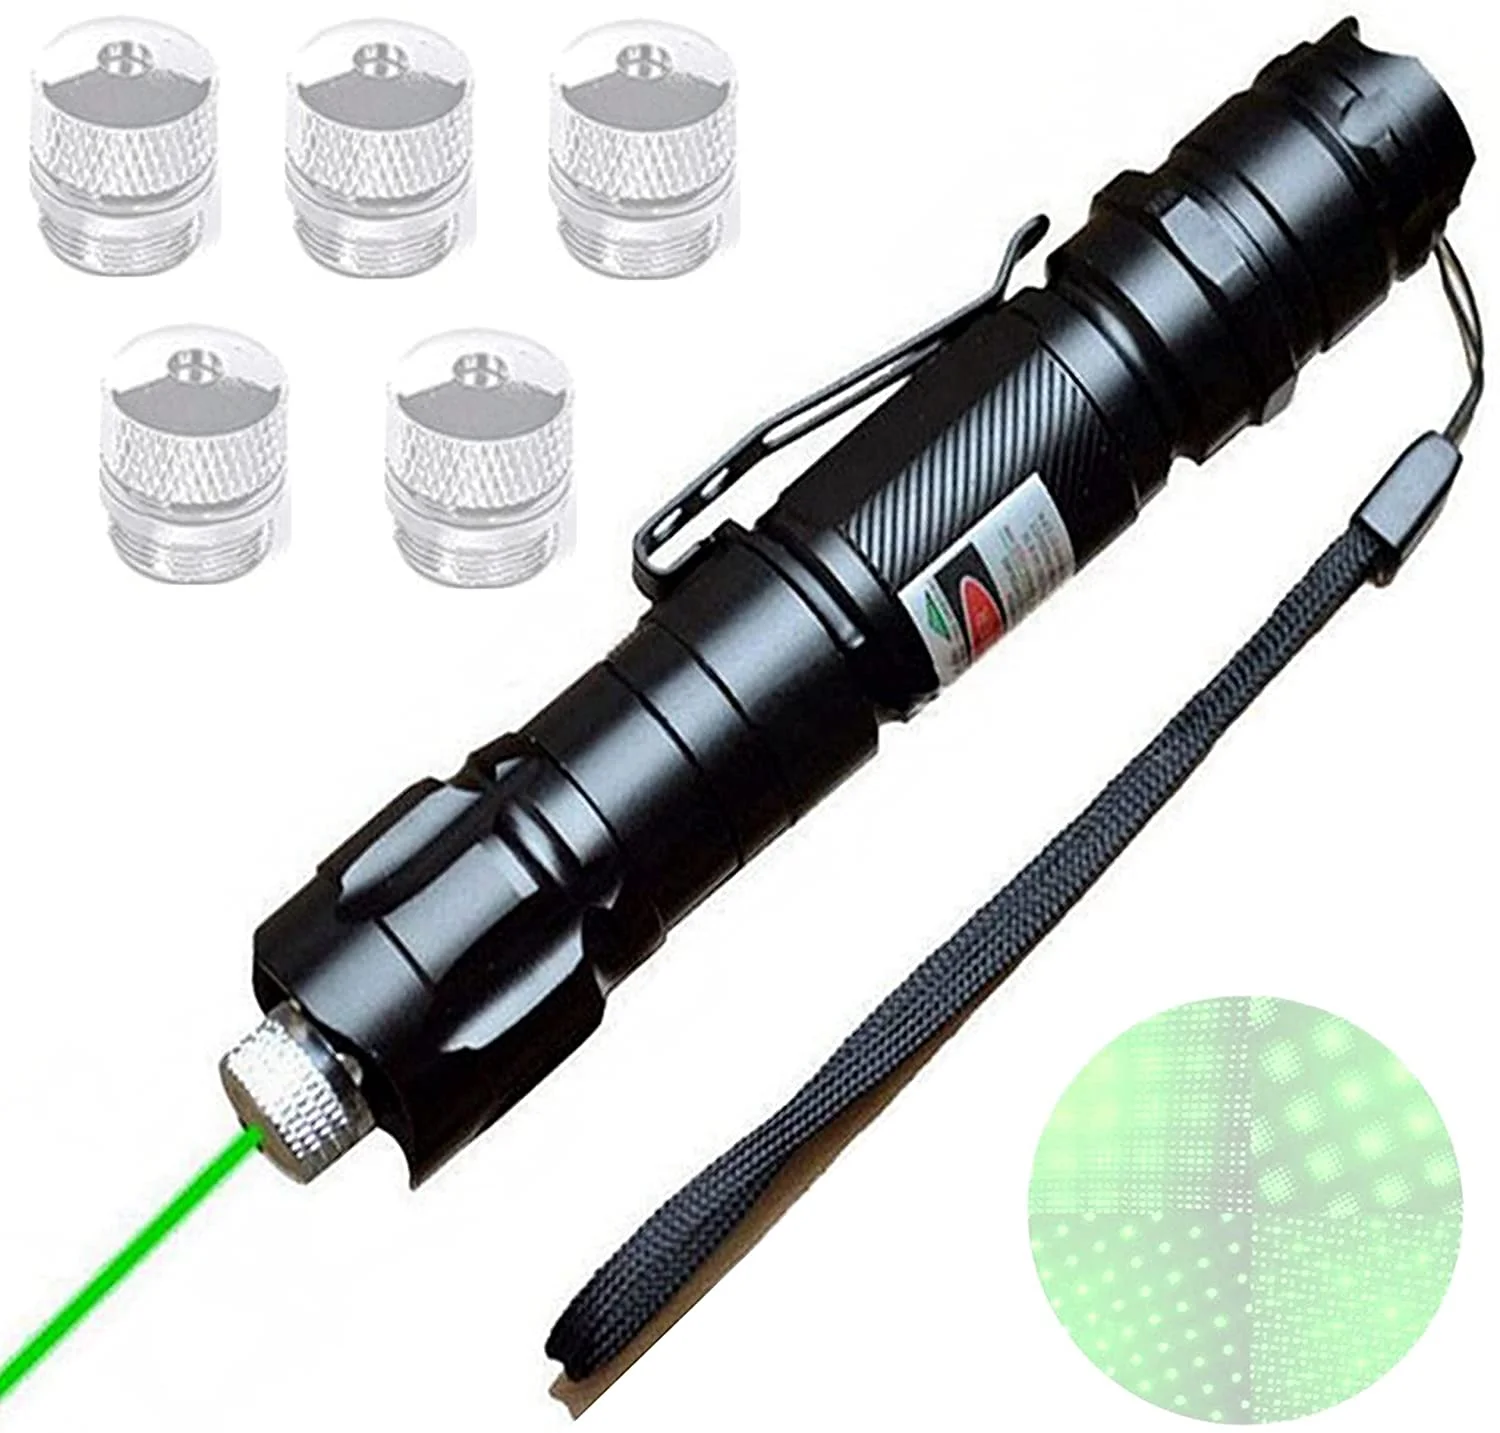 2PC Red Green Laser Pointer Pen Visible Beam Rechargeable Lazer Waterproof USA 